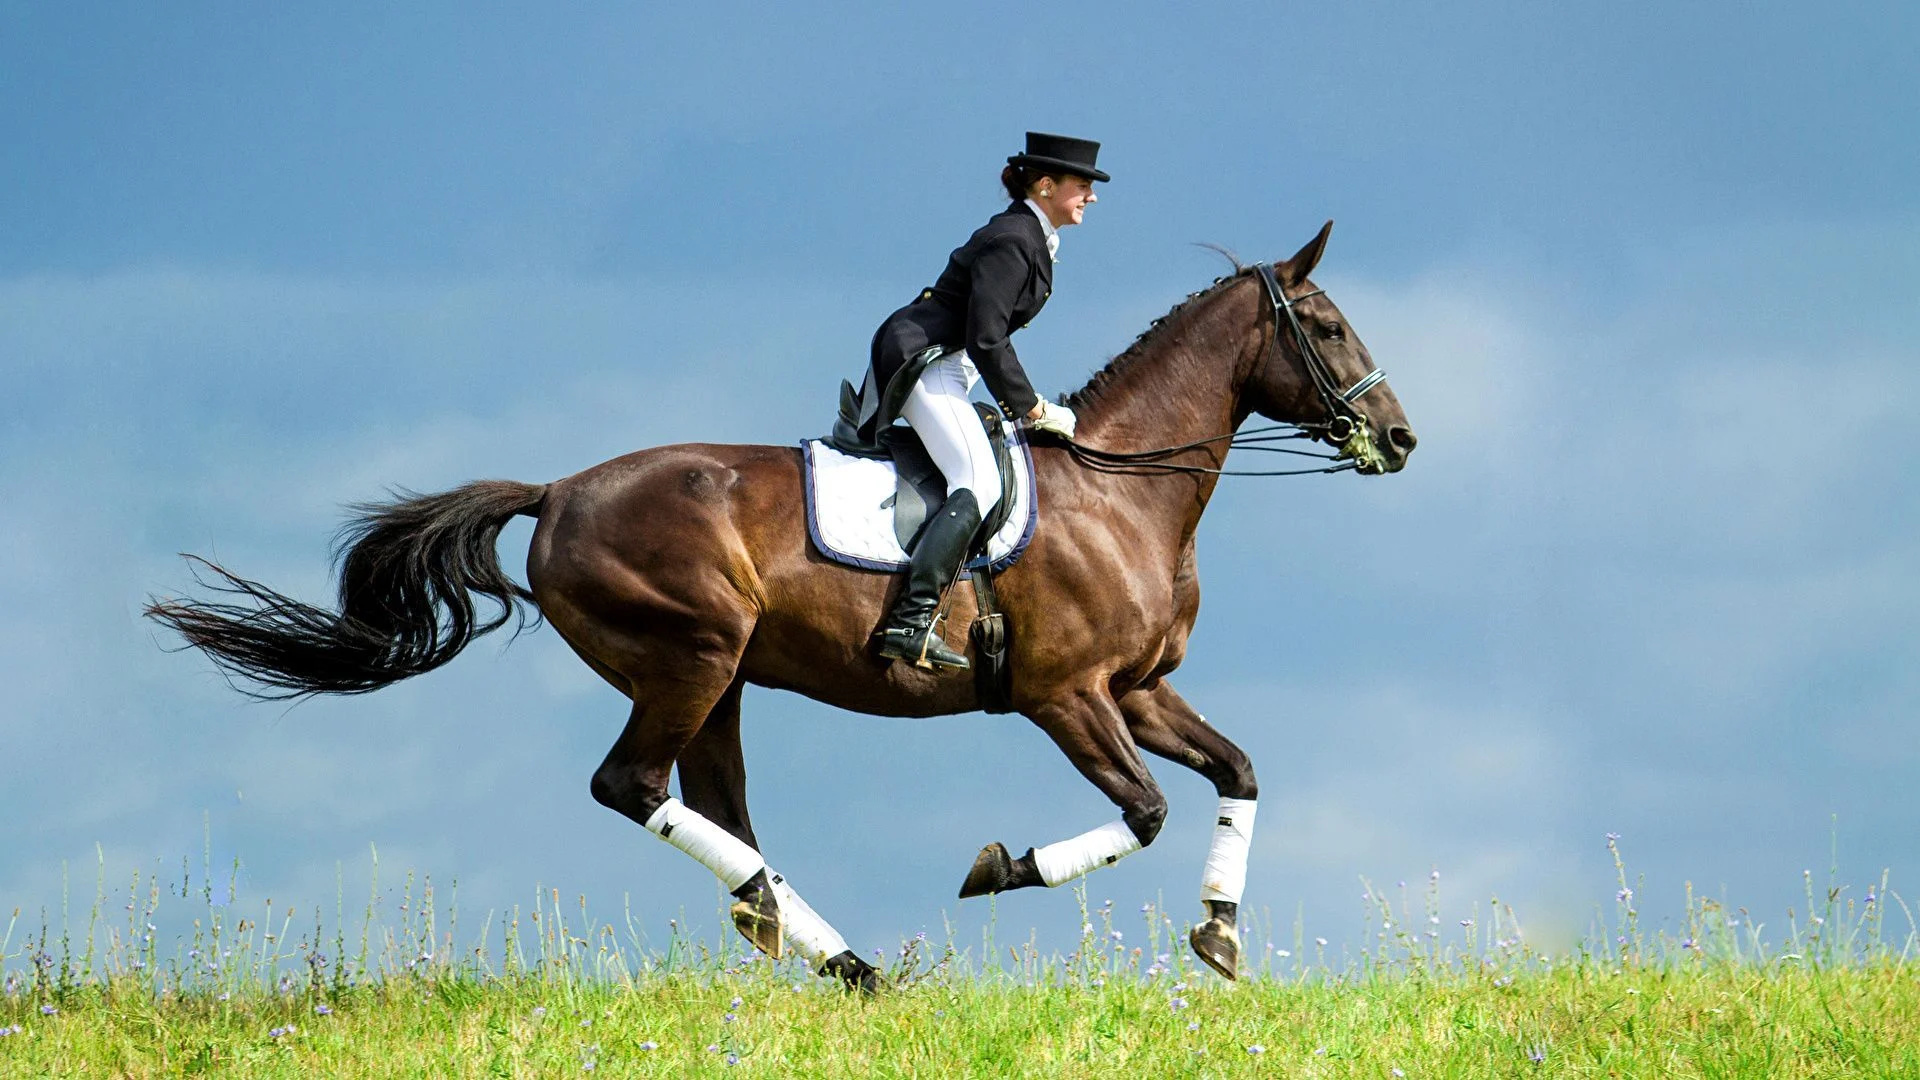 Dressage: A horse at the canter, Upper level, Equestrian sports. 1920x1080 Full HD Background.